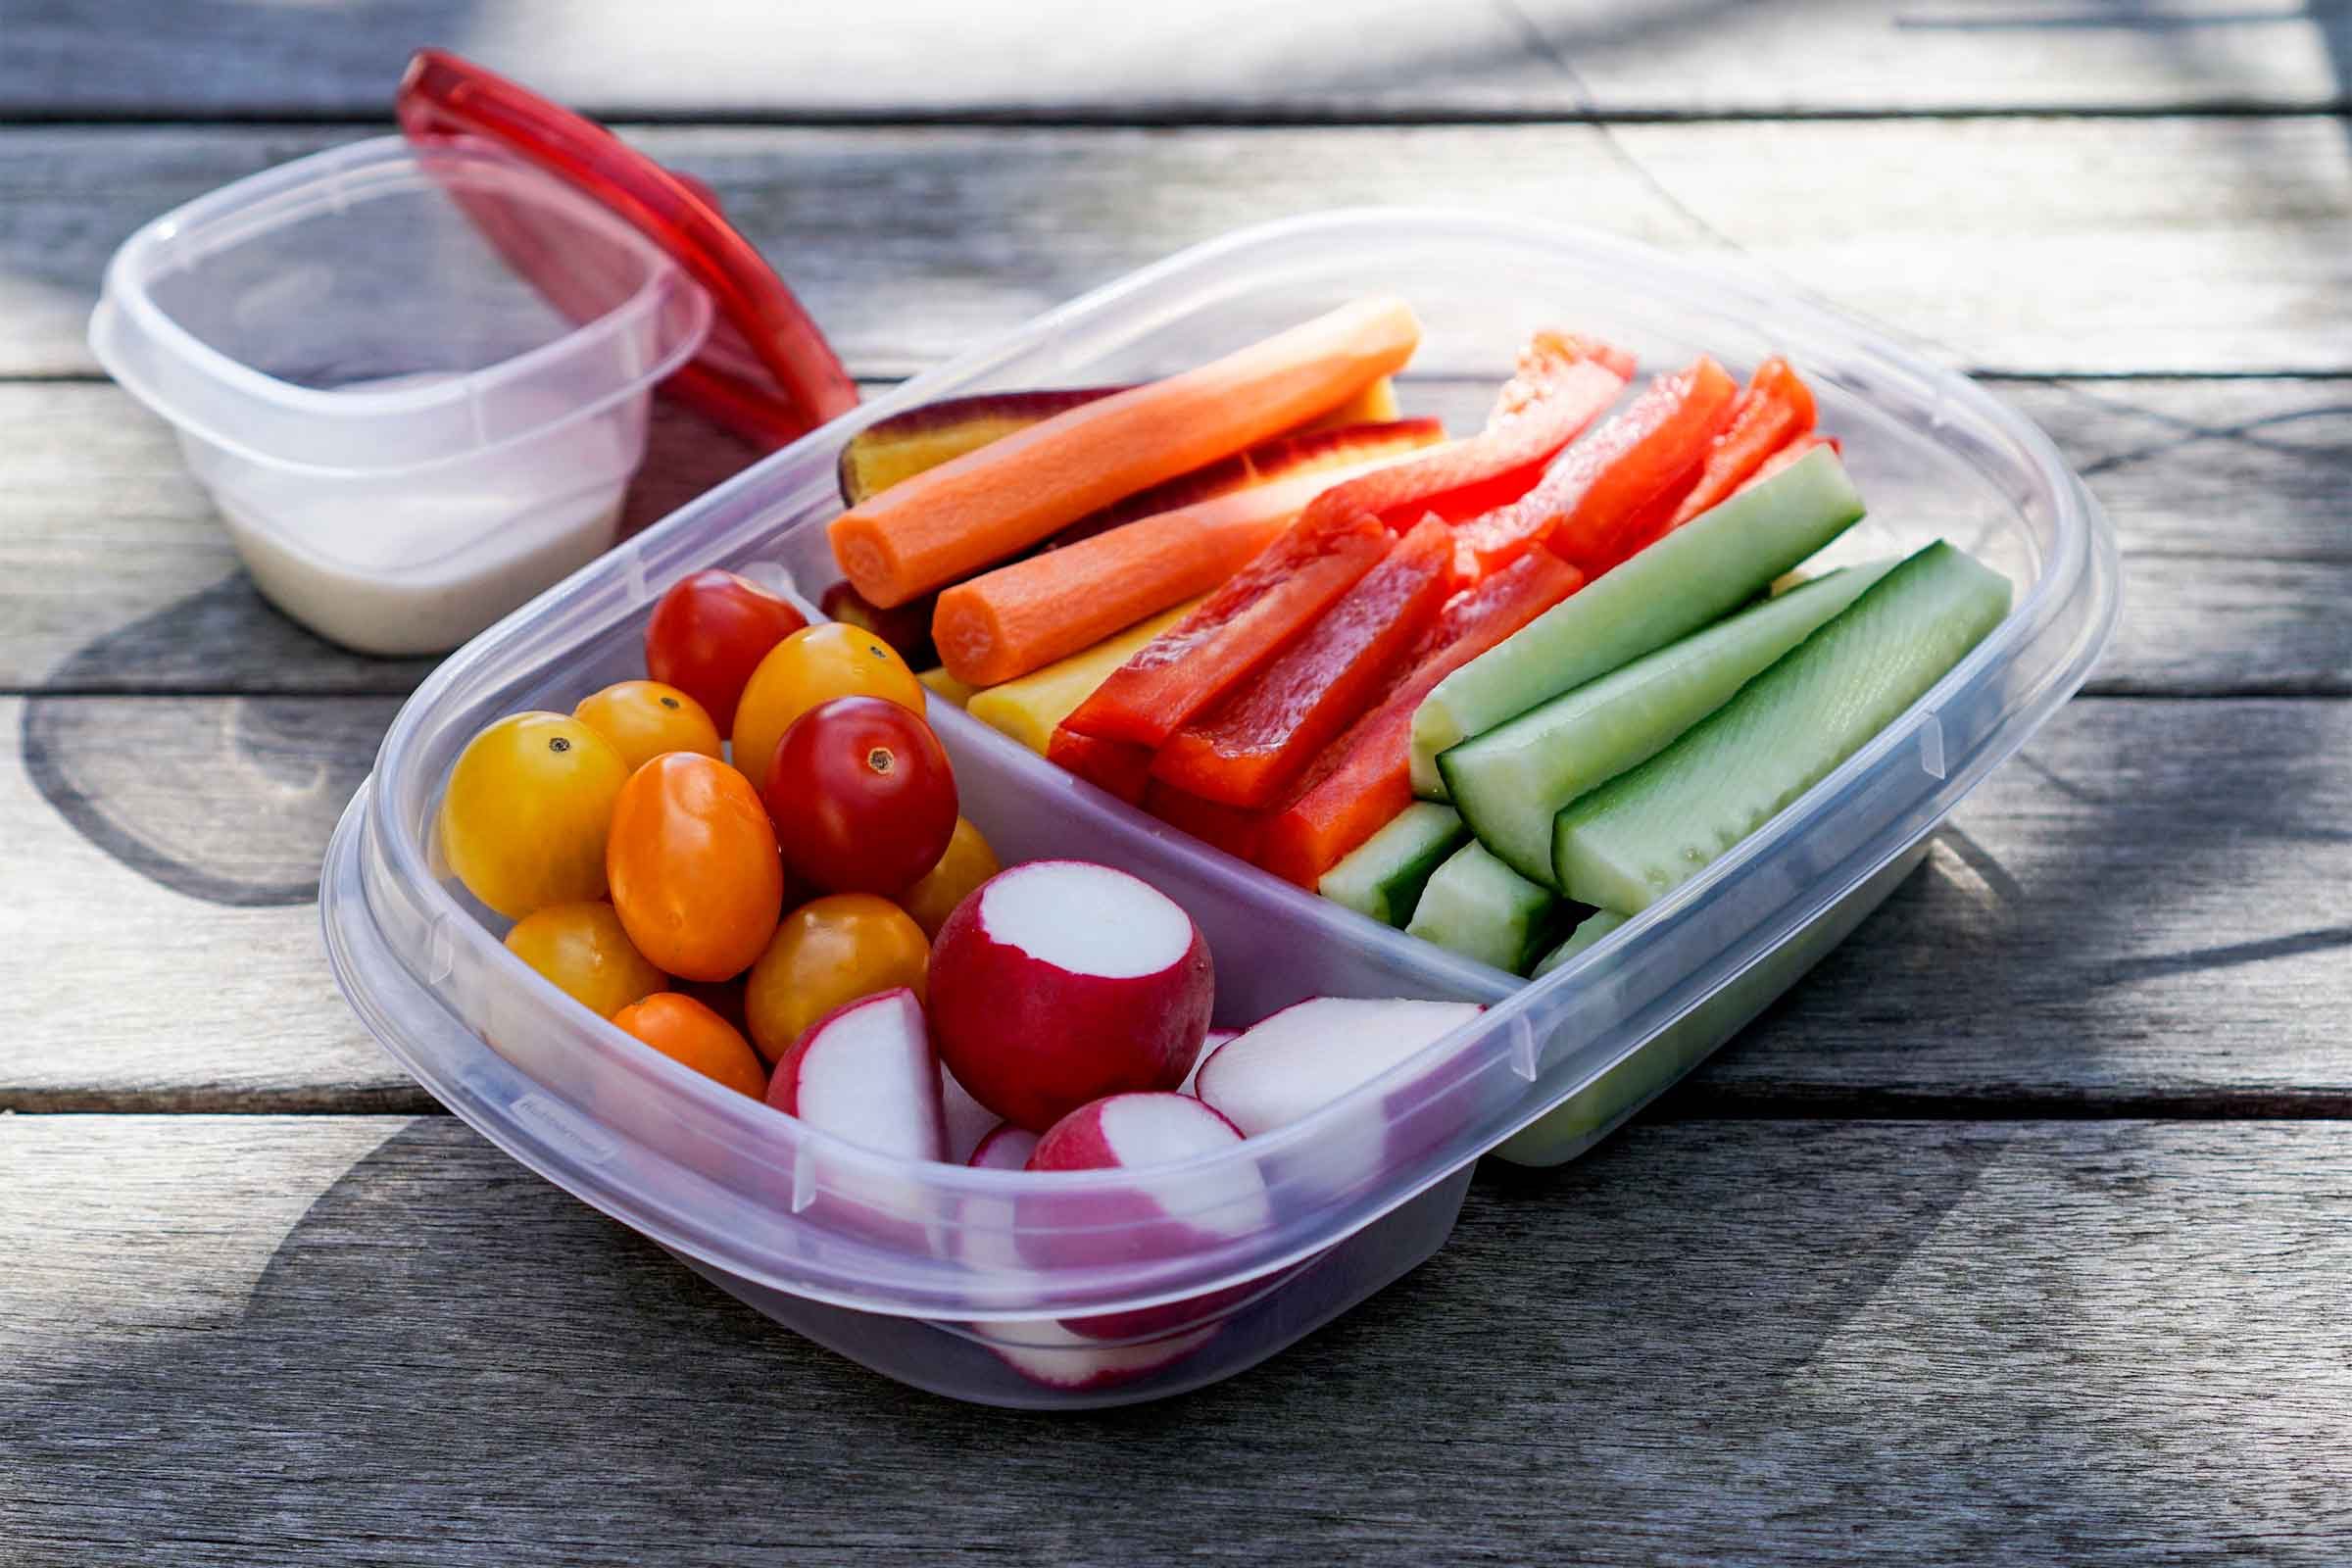 Take a page from your preschooler and pack a snack